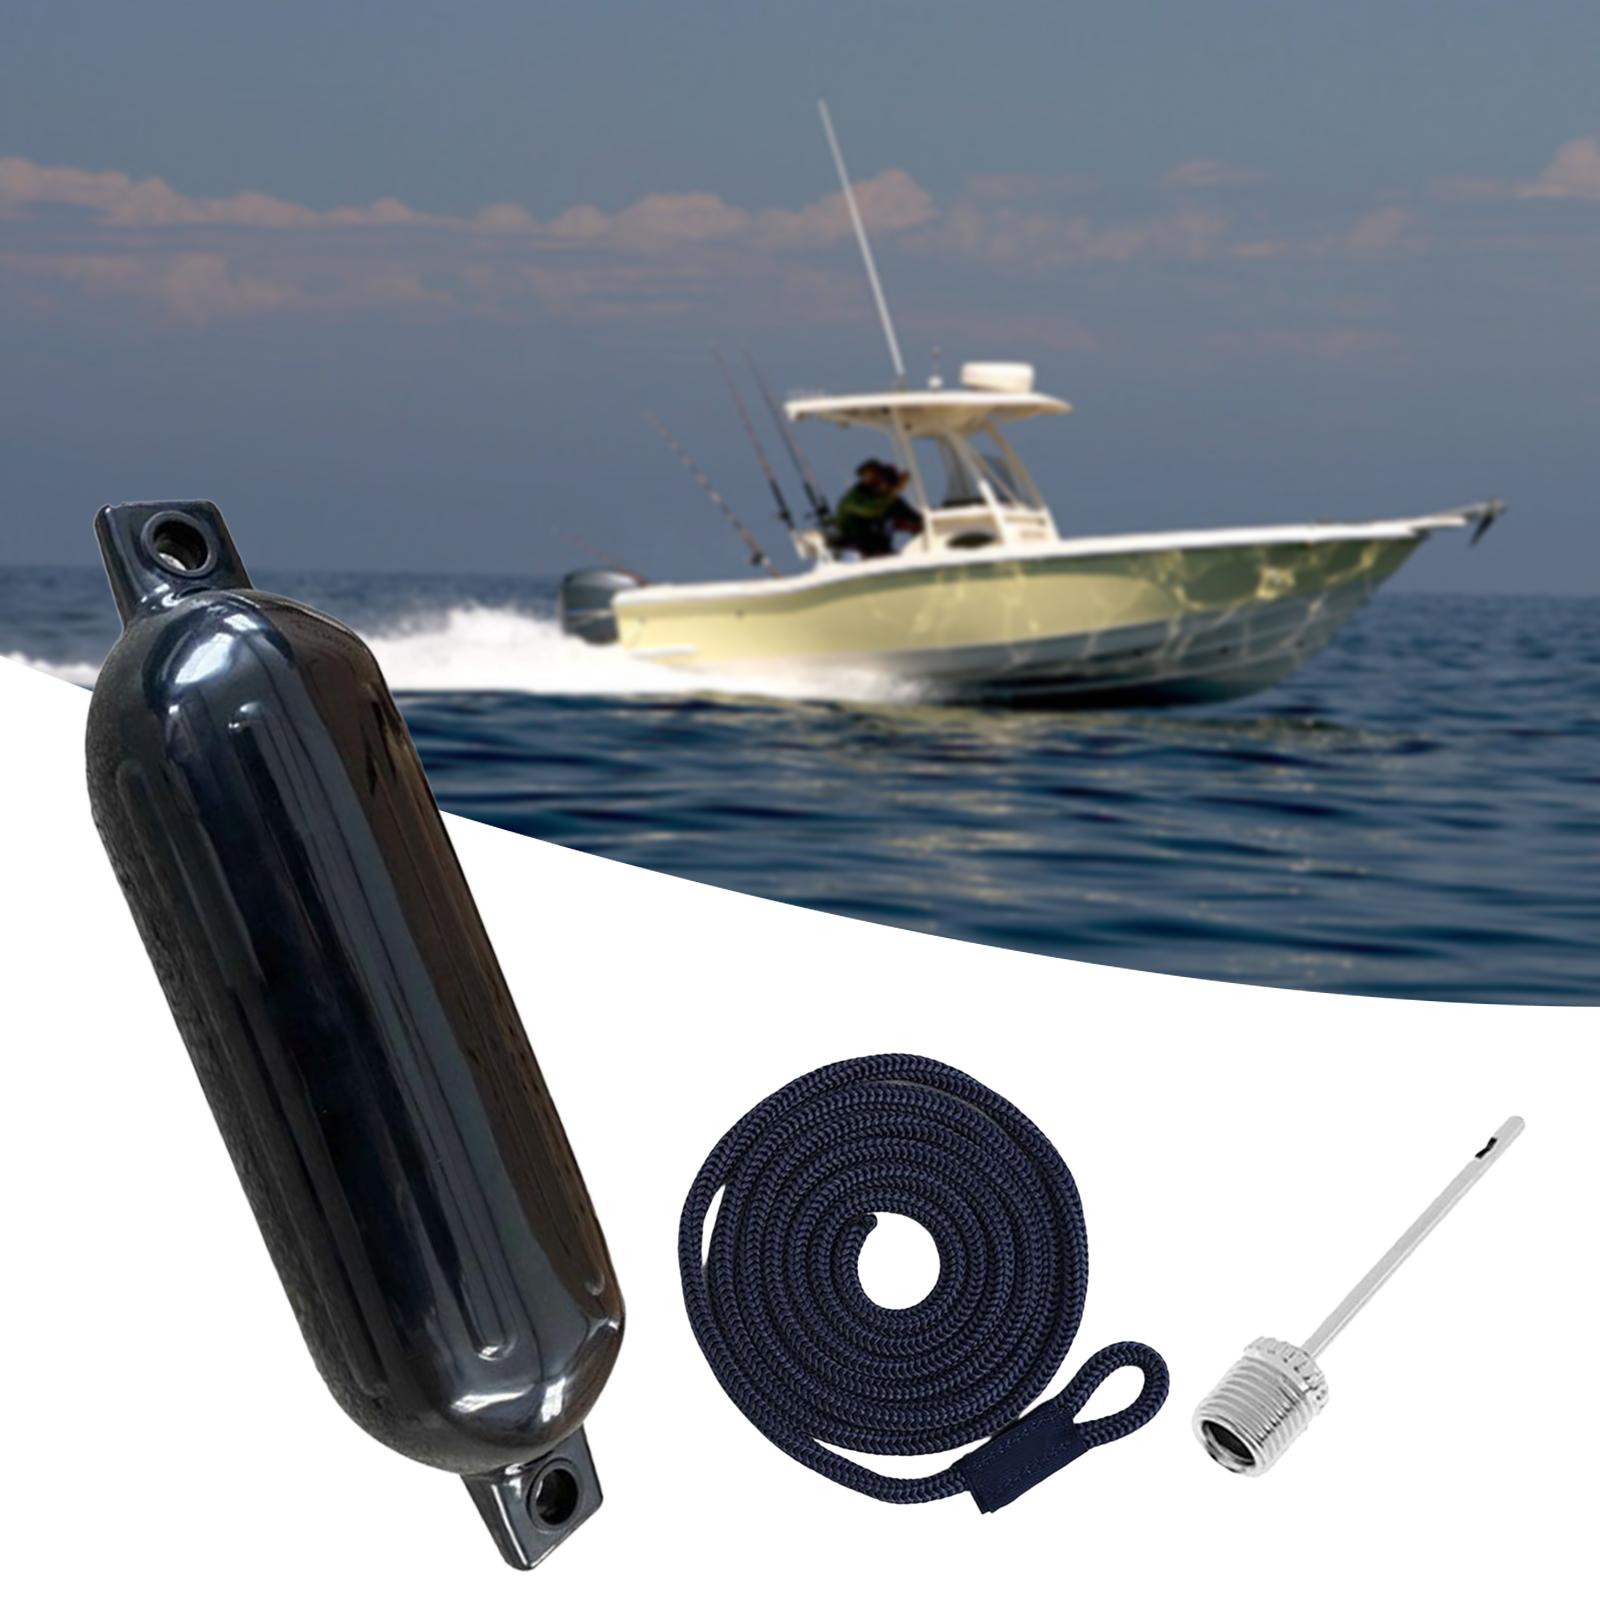 Marine Dock Shield Protection Inflatable Marine Bumper Fishing Boat Bumpers